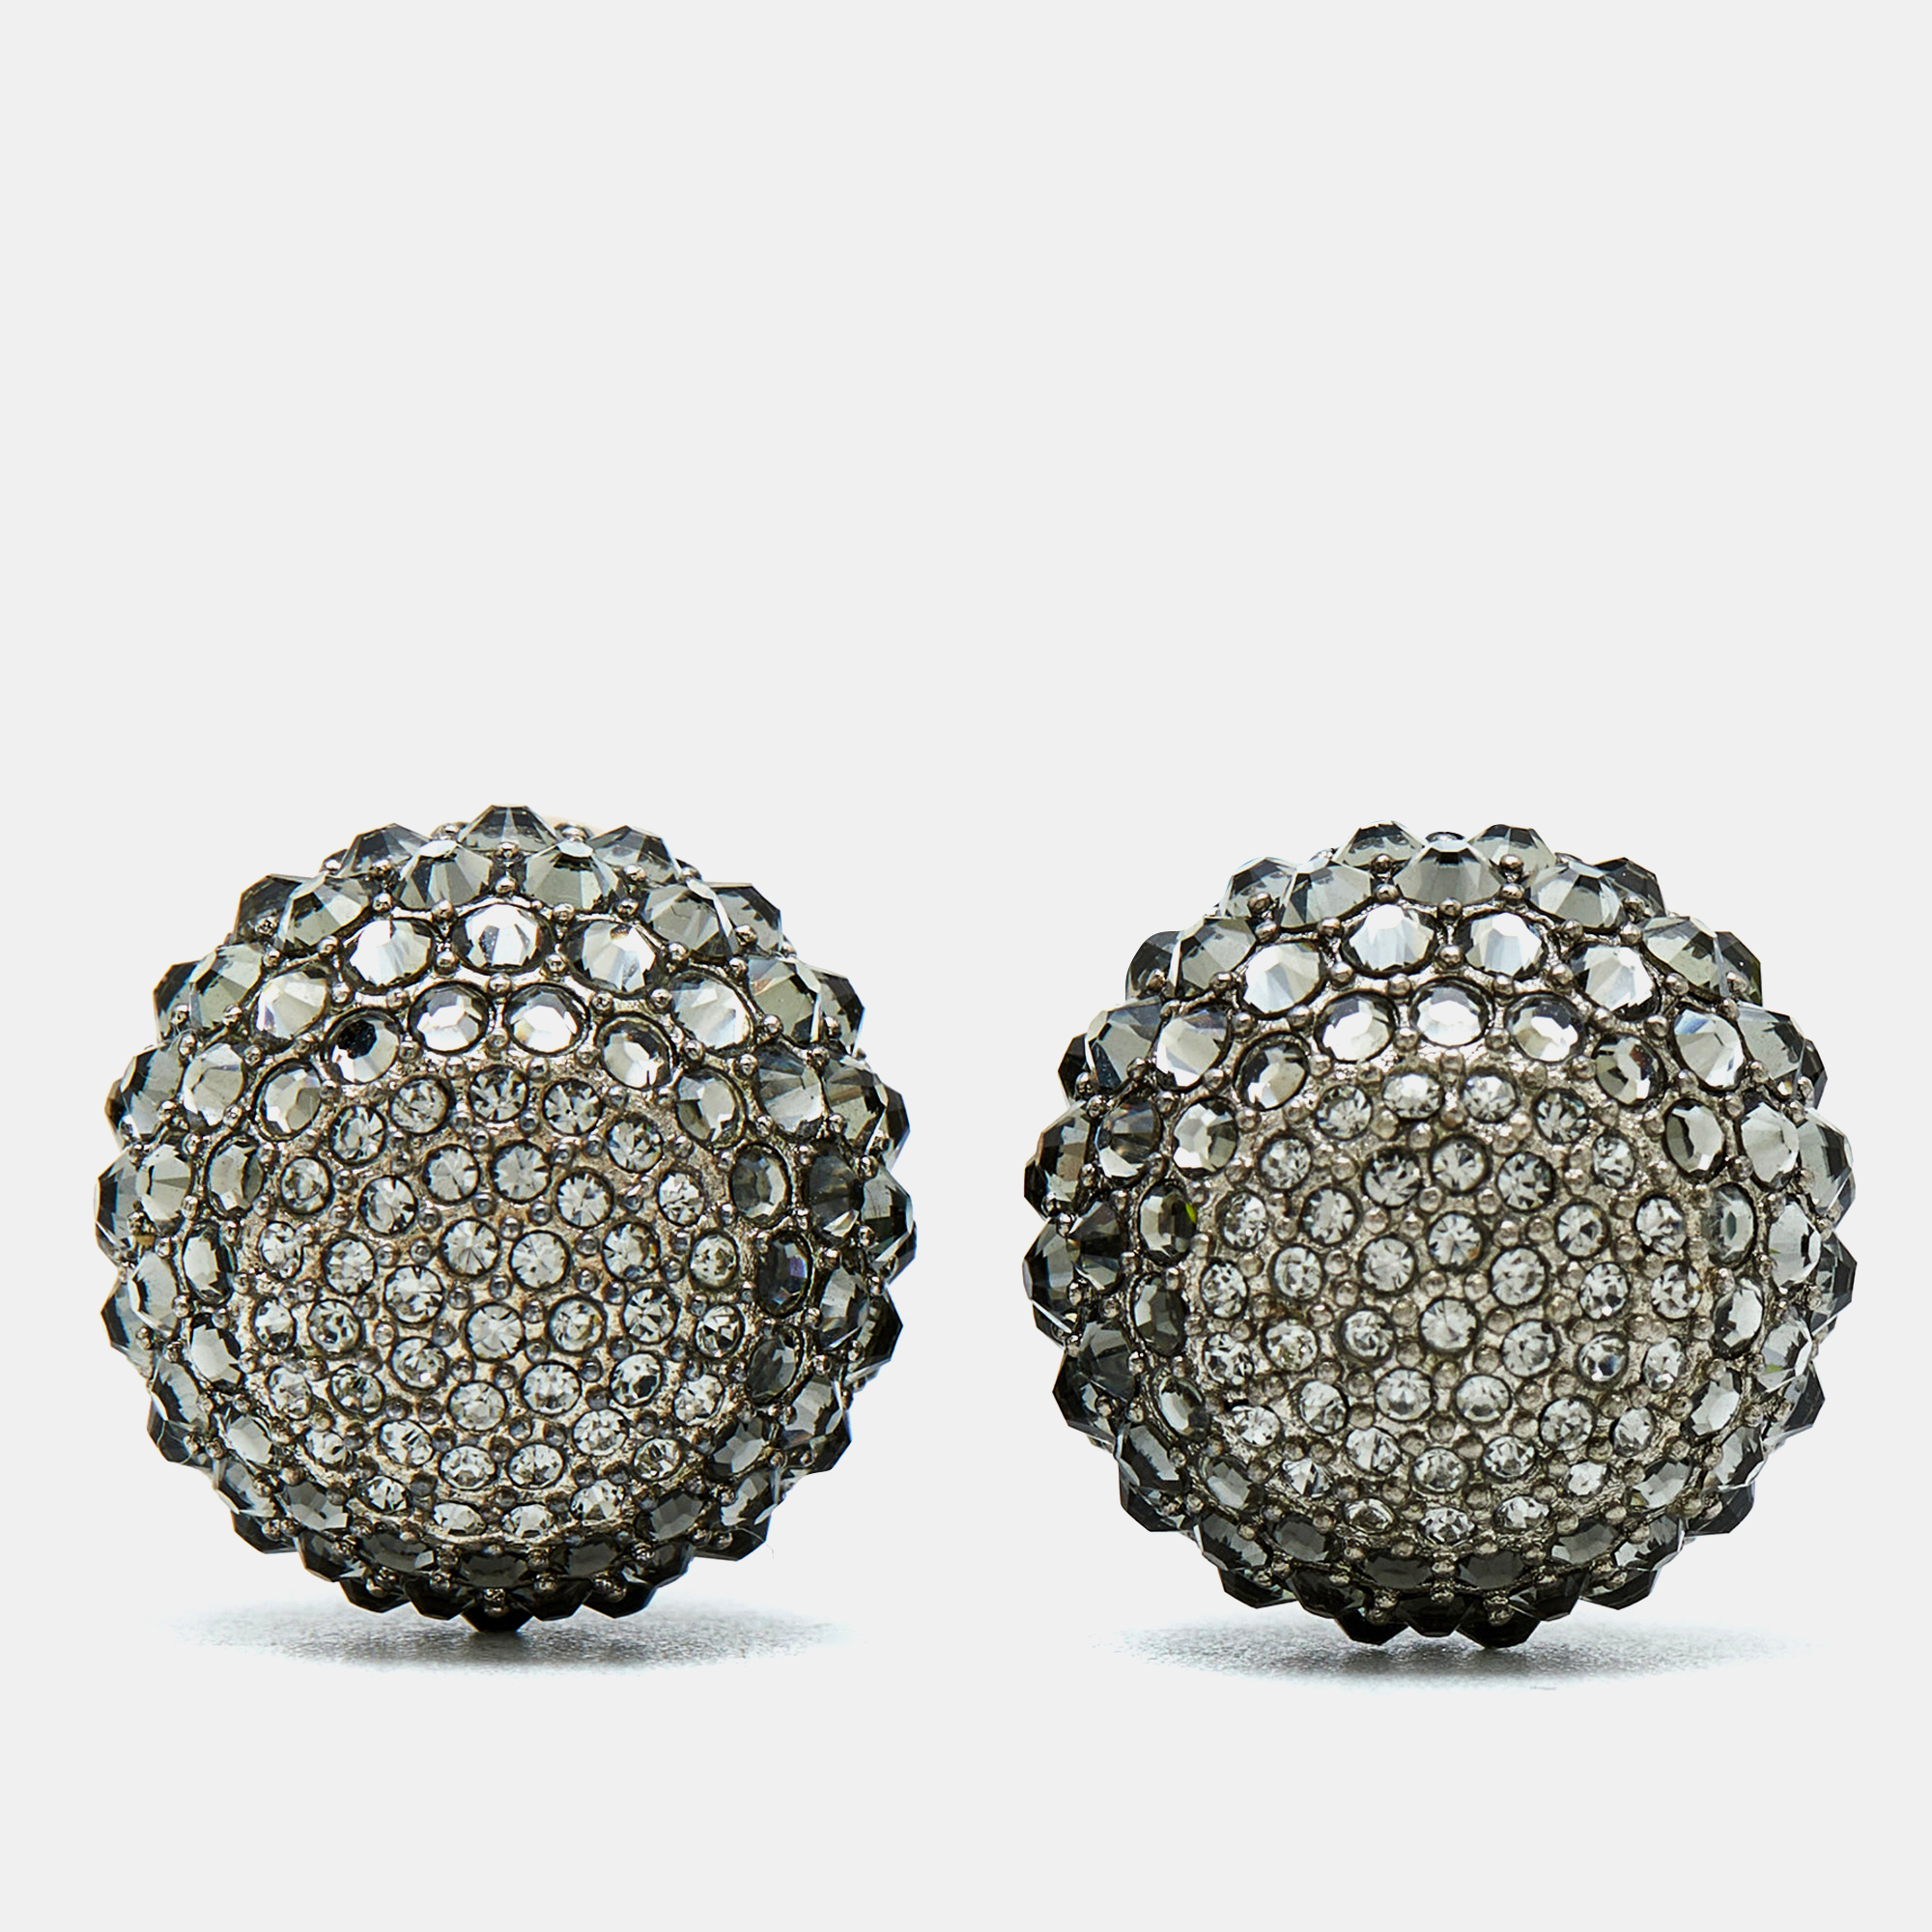 Dior Tribales Crystals Faux Pearl Silver Tone Earrings